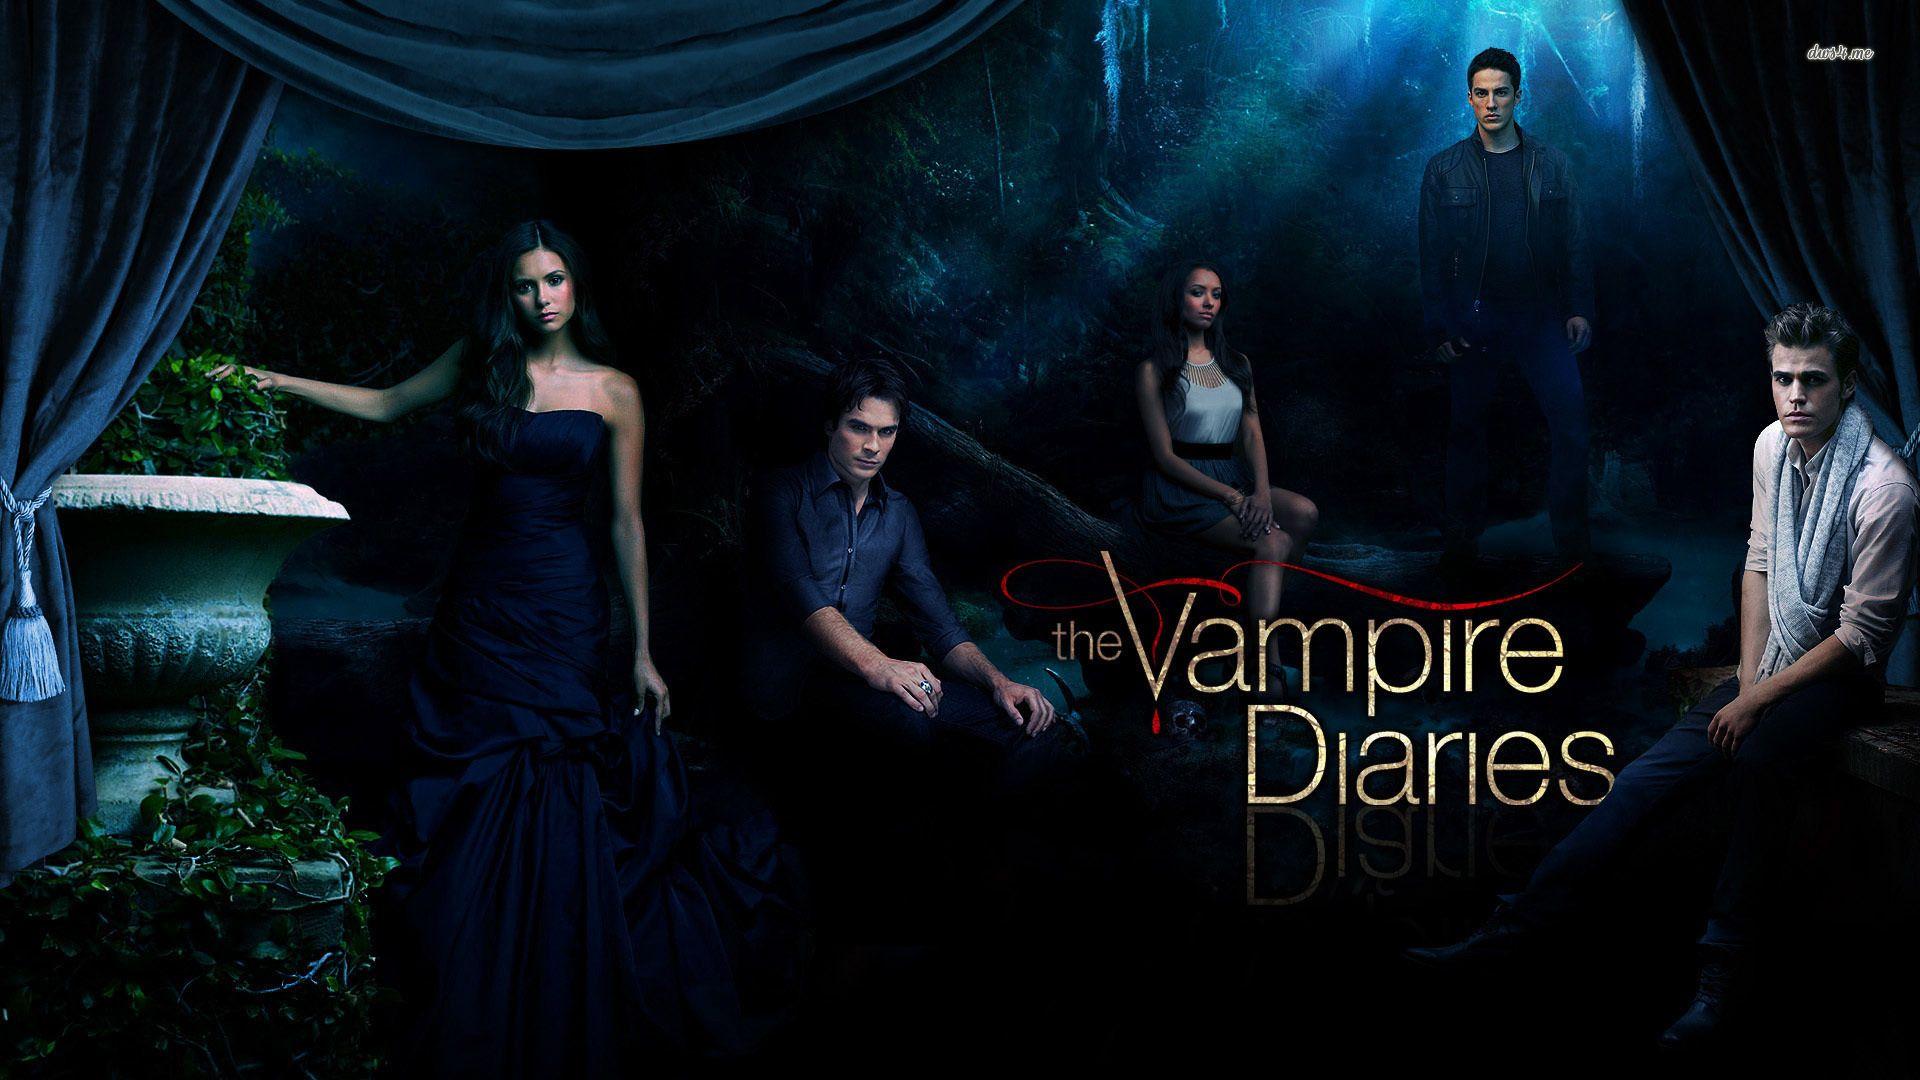 Vampire Diaries Wallpaper High Resolution and Quality Download